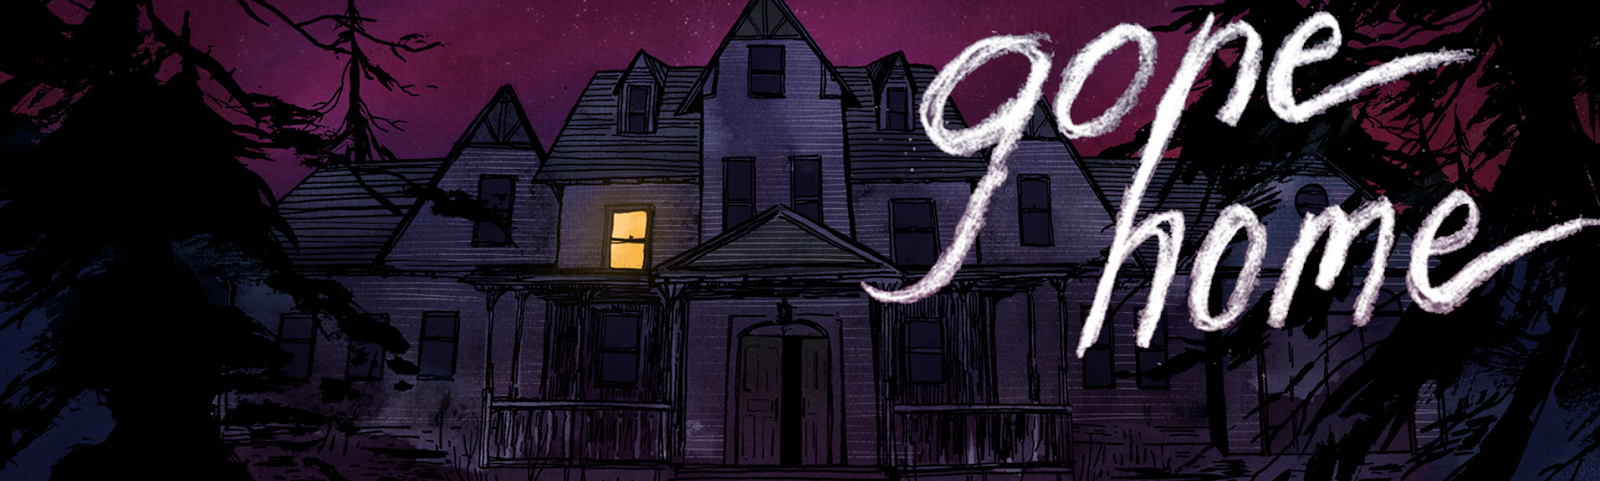 Go home game. Gone Home игра. Gone Home карта. Gone Home (2013). Gone Home логотип.